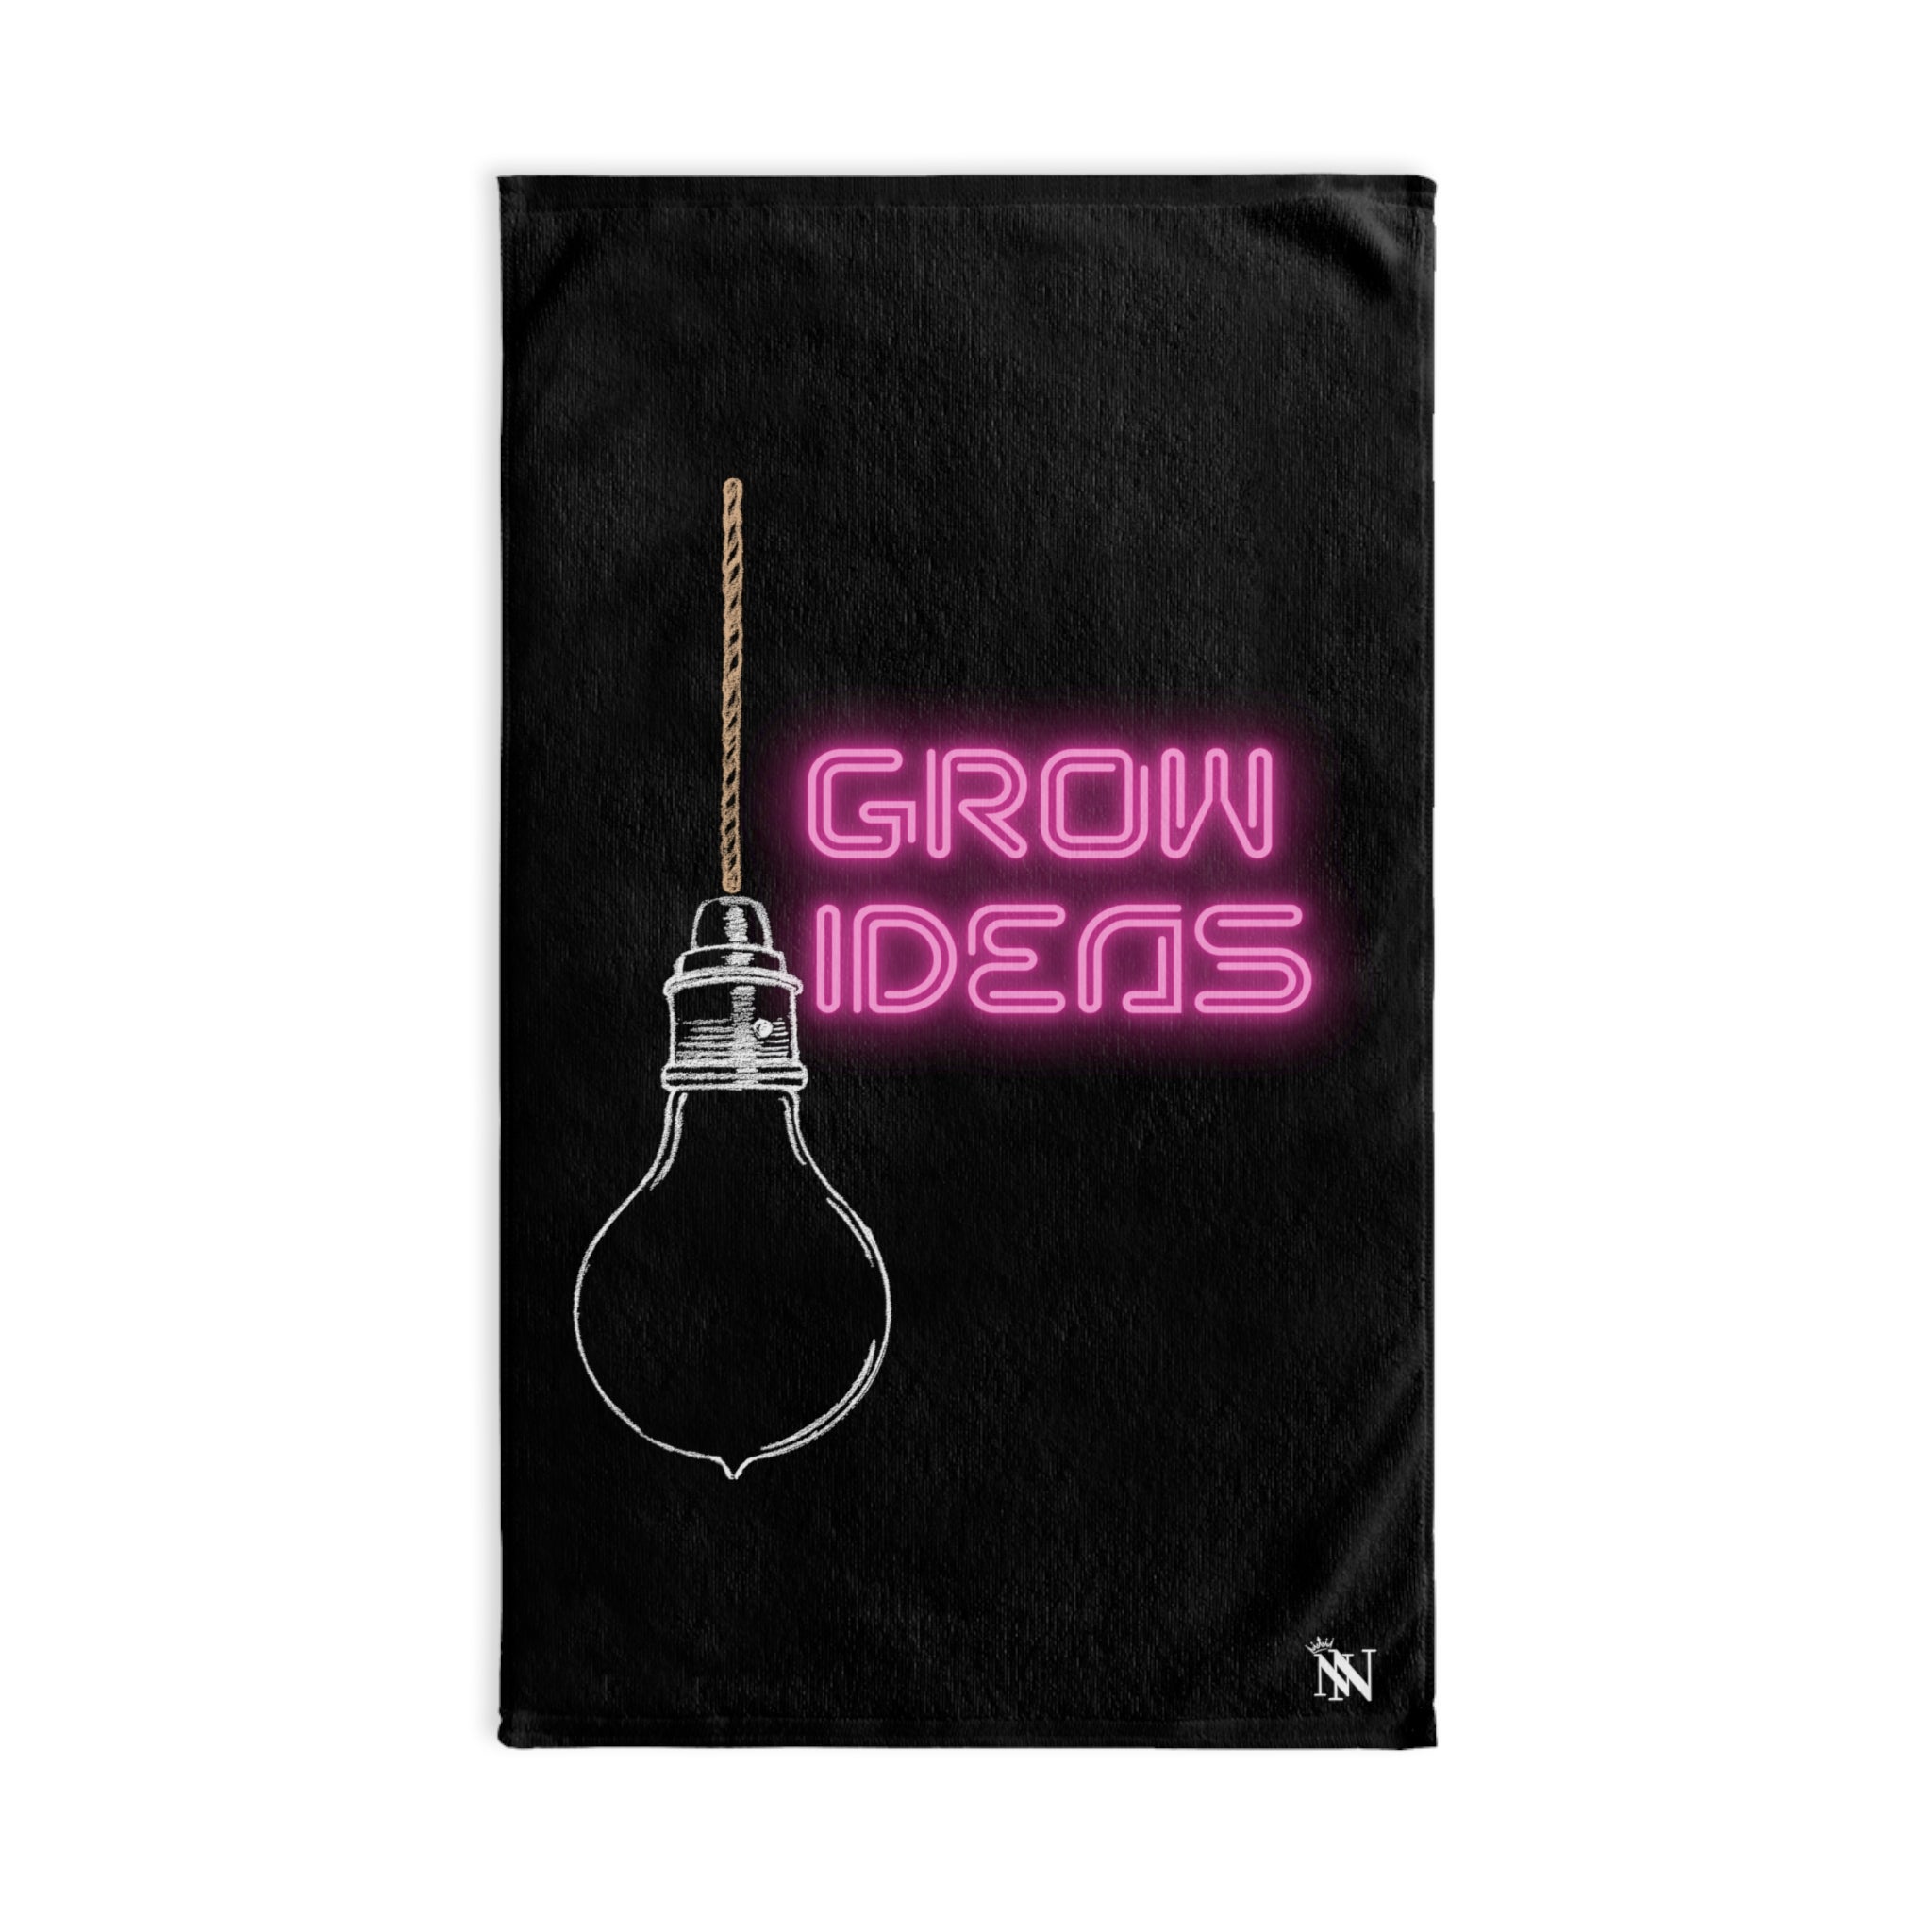 Grow Ideas Black | Sexy Gifts for Boyfriend, Funny Towel Romantic Gift for Wedding Couple Fiance First Year 2nd Anniversary Valentines, Party Gag Gifts, Joke Humor Cloth for Husband Men BF NECTAR NAPKINS